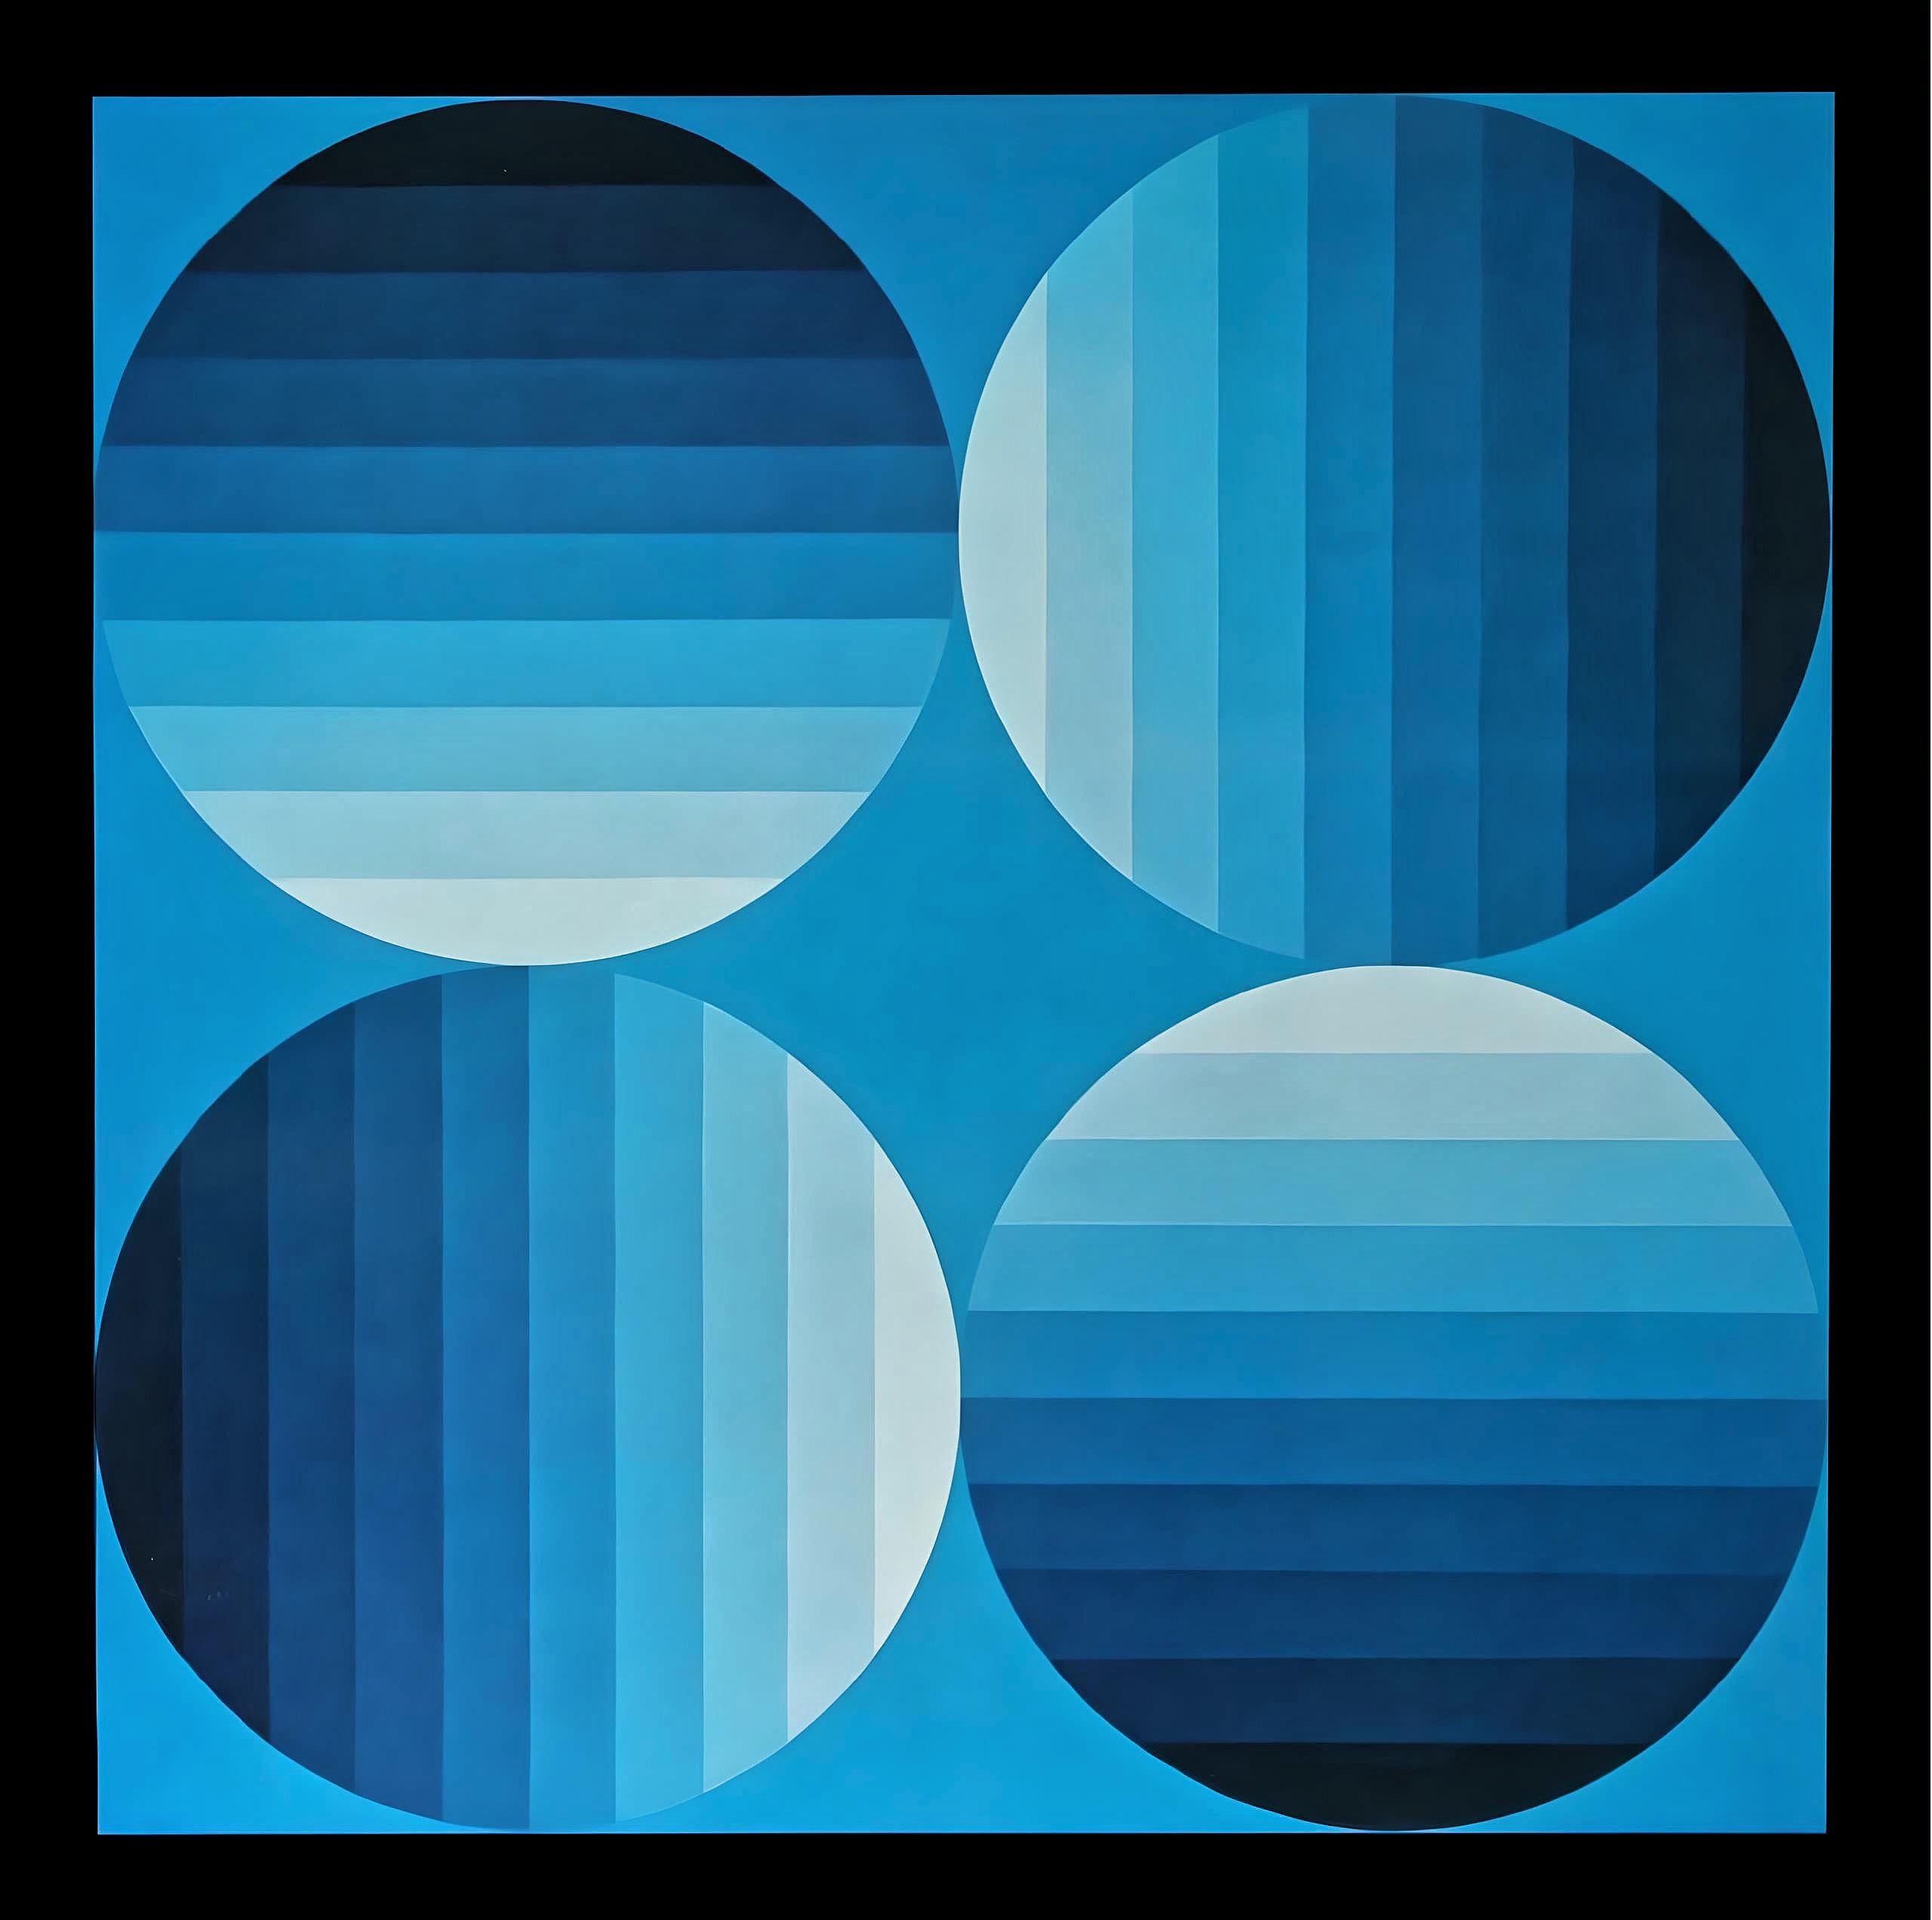 Victor Vasarely Abstract Print - Vasarely, Composition, Progressions (after)